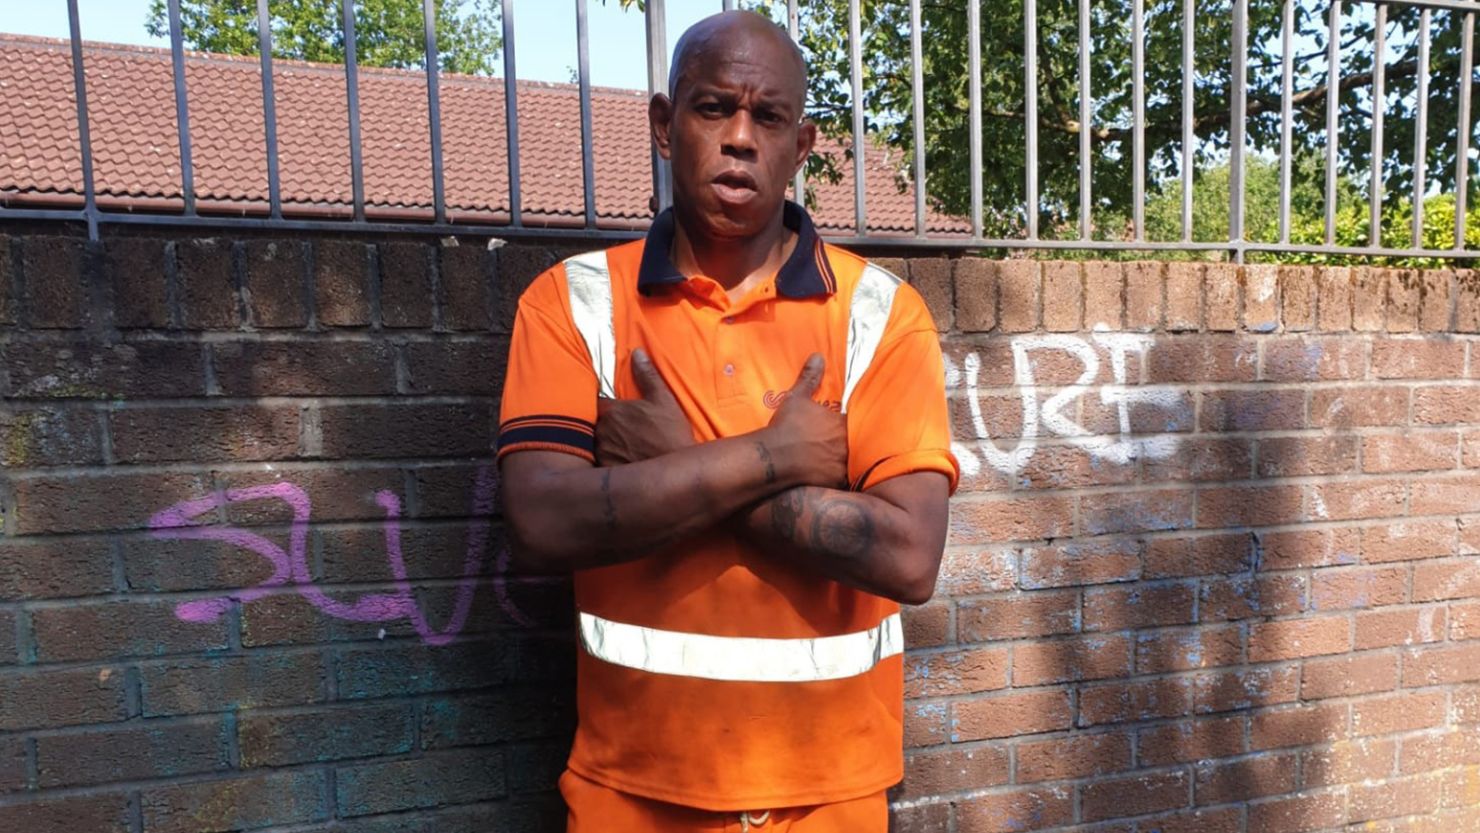 Carl Nwazota, who now works as a refuse collector, says he lost his job and his home after his passport was revoked by the UK Home Office. It has since been reinstated.